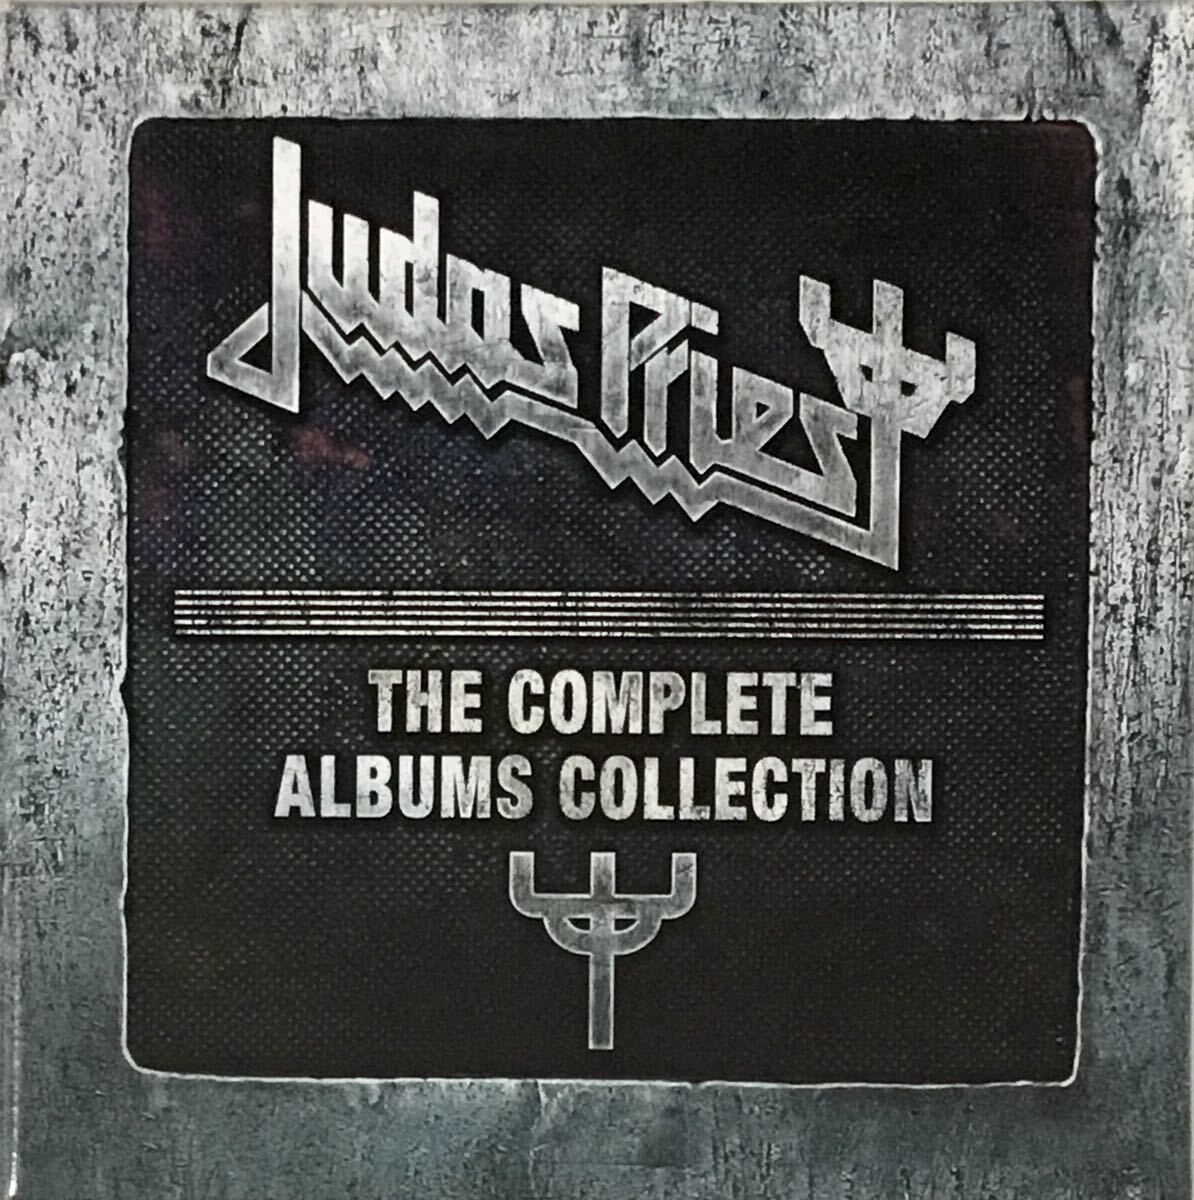 ☆ JUDAS PRIEST THE COMPLETE ALBUMS COLLECTION CD-BOX CD19枚組 輸入盤